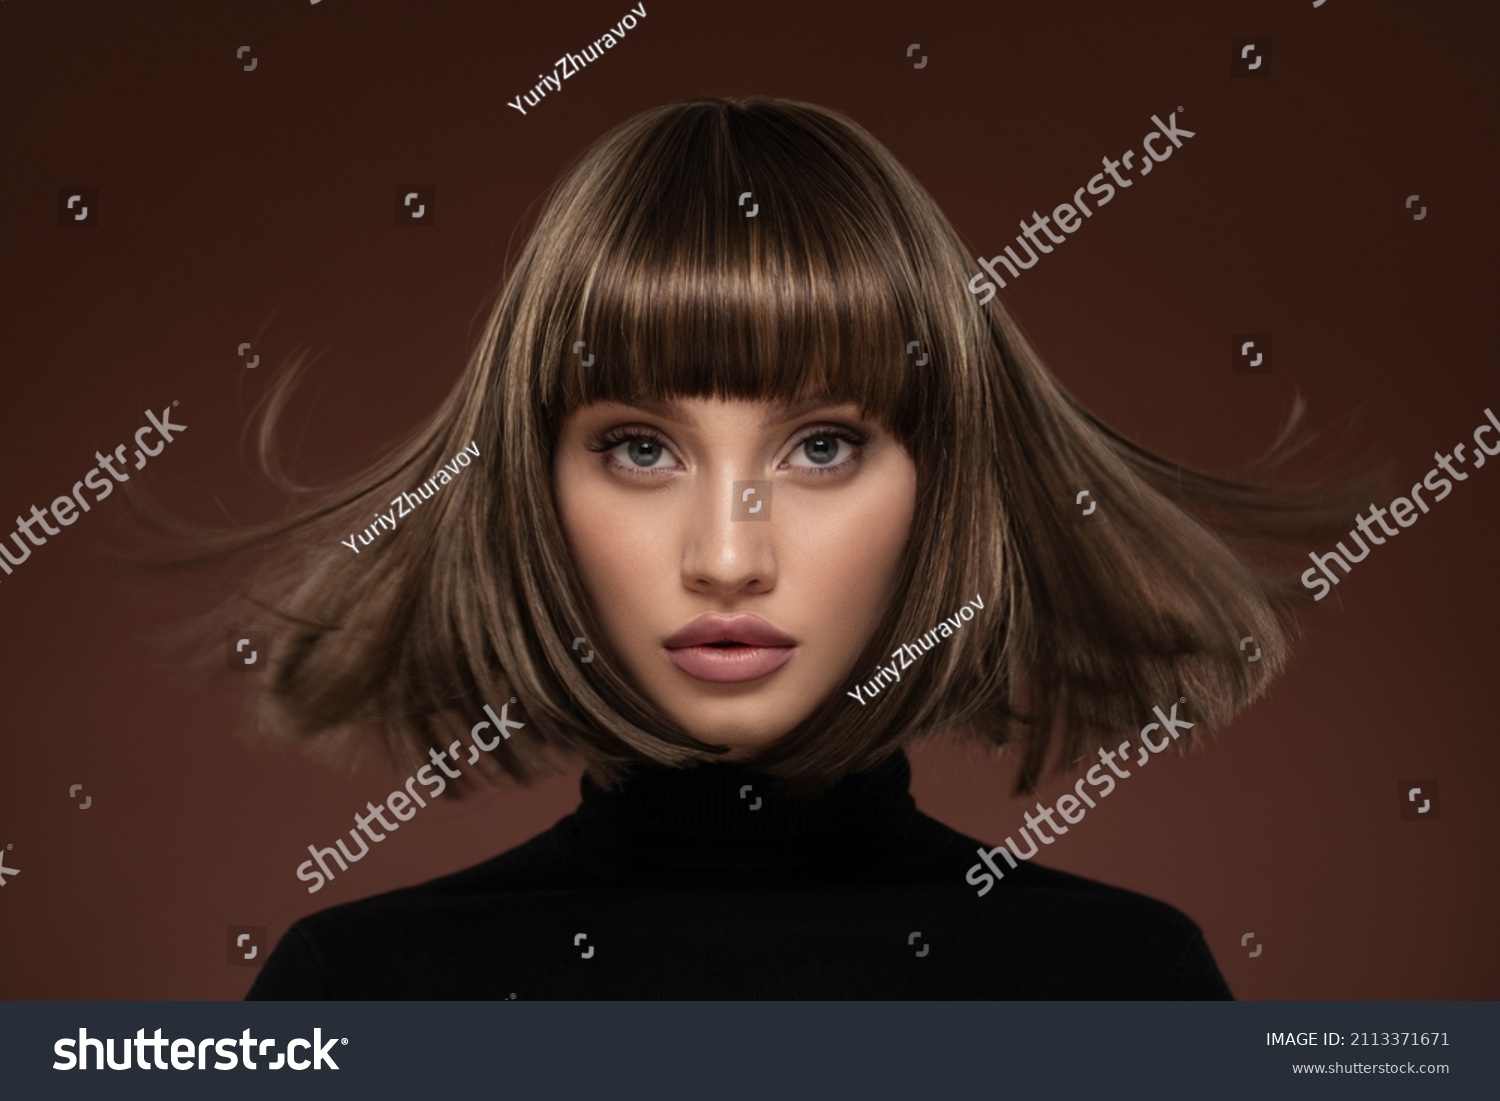 Portrait of a beautiful brown-haired woman with a short haircut on a brown background #2113371671